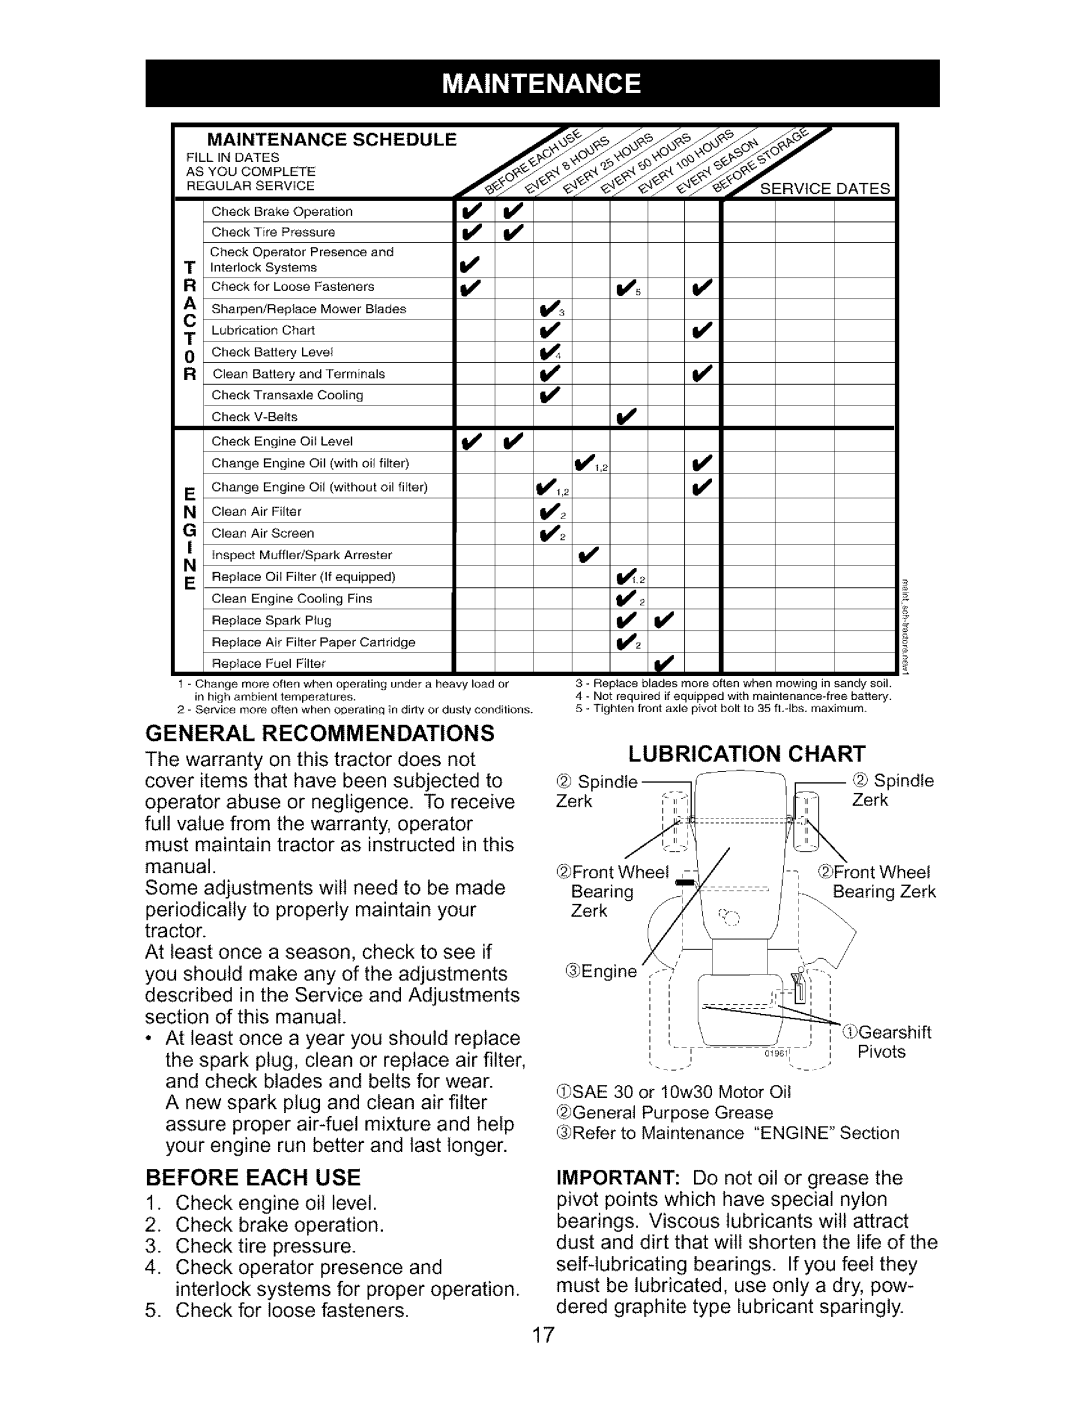 Craftsman 917.27317 owner manual Lubrication, Chart, General Recommendations, Maintenance Schedule, I_,_, _ _,_ _ o._. ,_ 